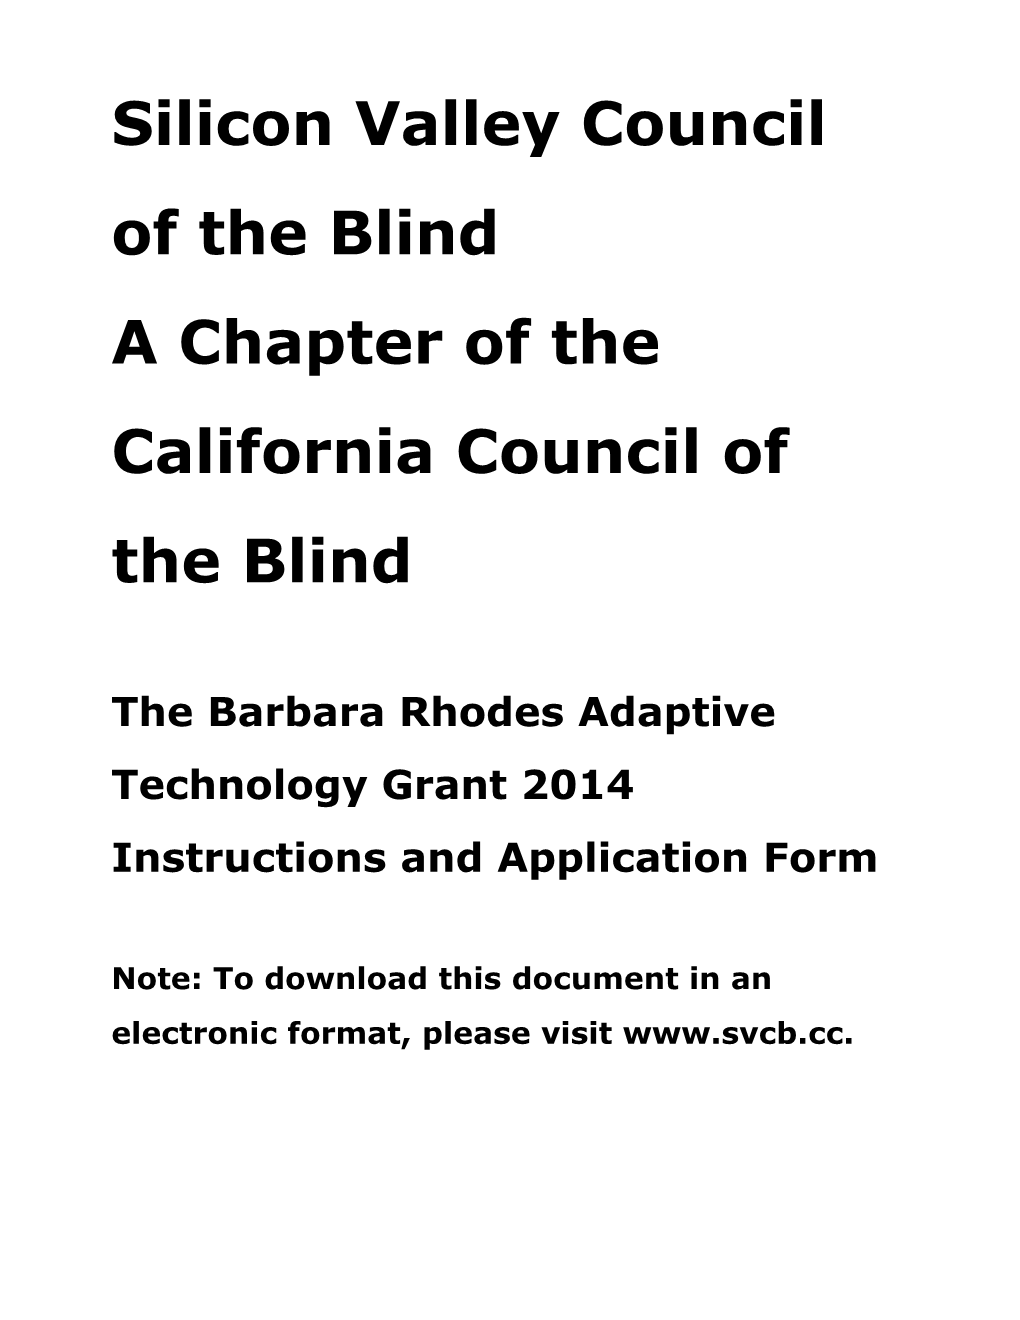 Silicon Valley Council of the Blind a Chapter of the California Council of the Blind The